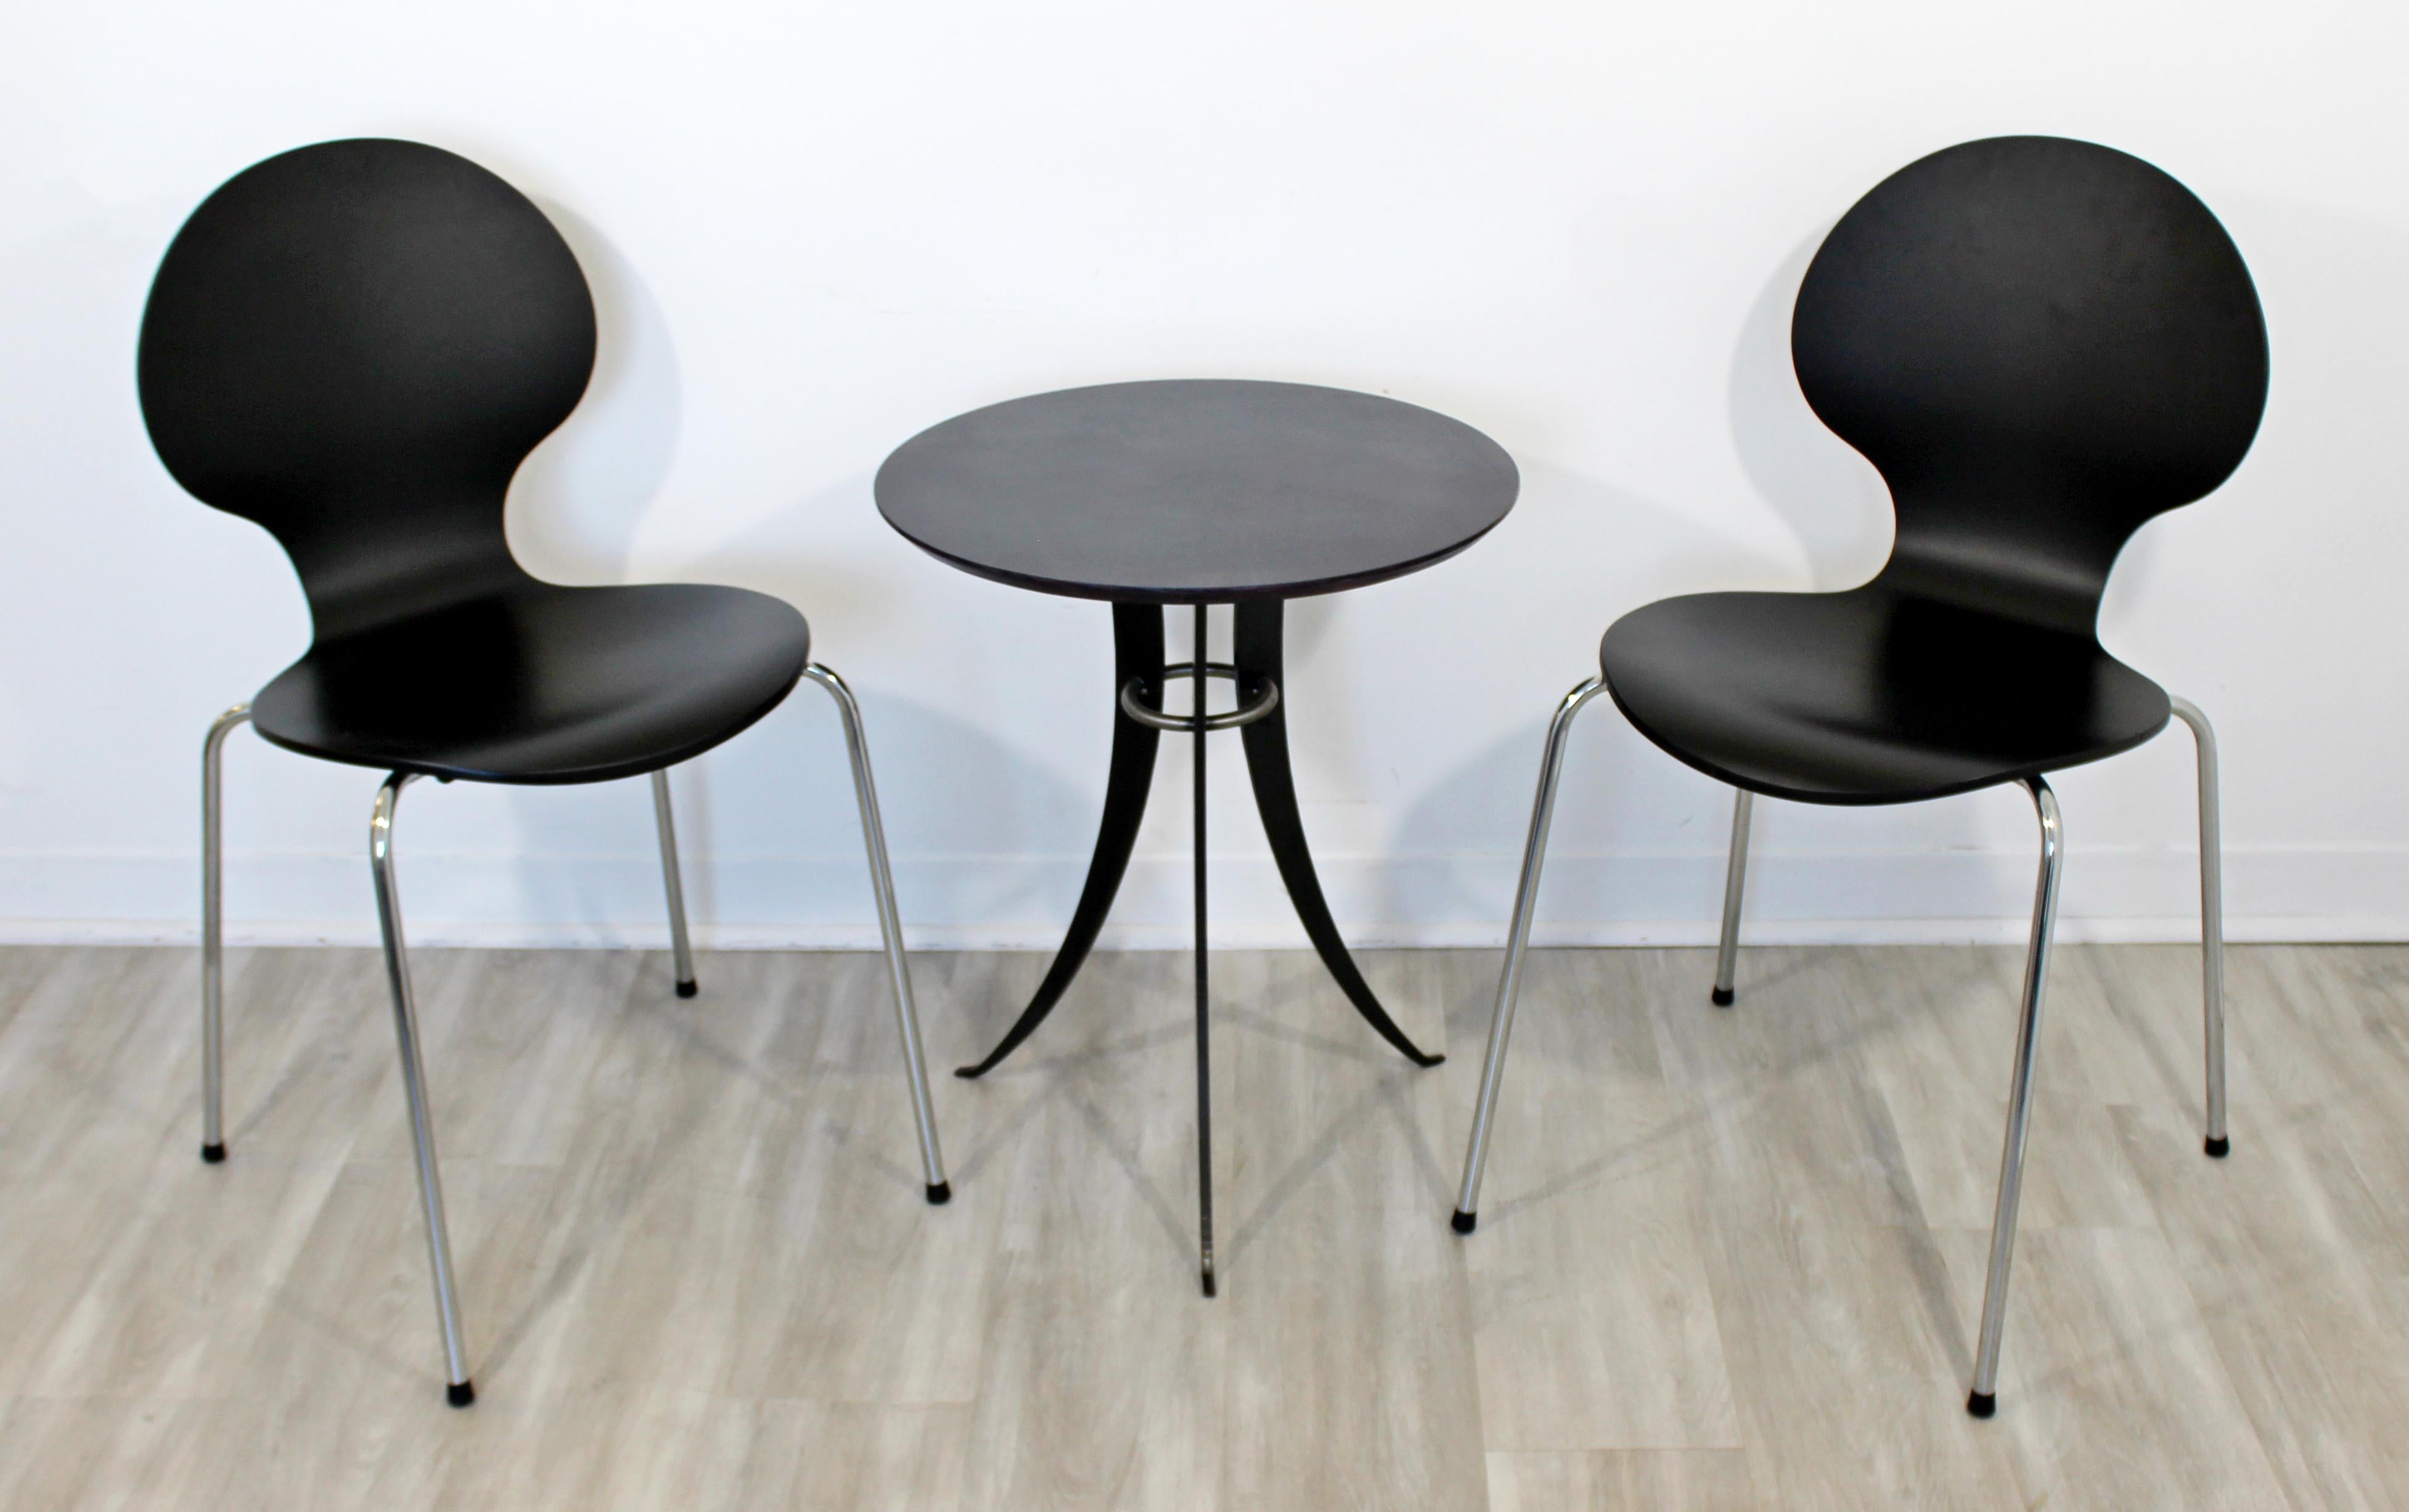 For your consideration is a wonderful set, including a cafe table and pair of side chairs, by Fritz Hansen, circa 1960s. In excellent vintage condition. The dimensions of the table are 20